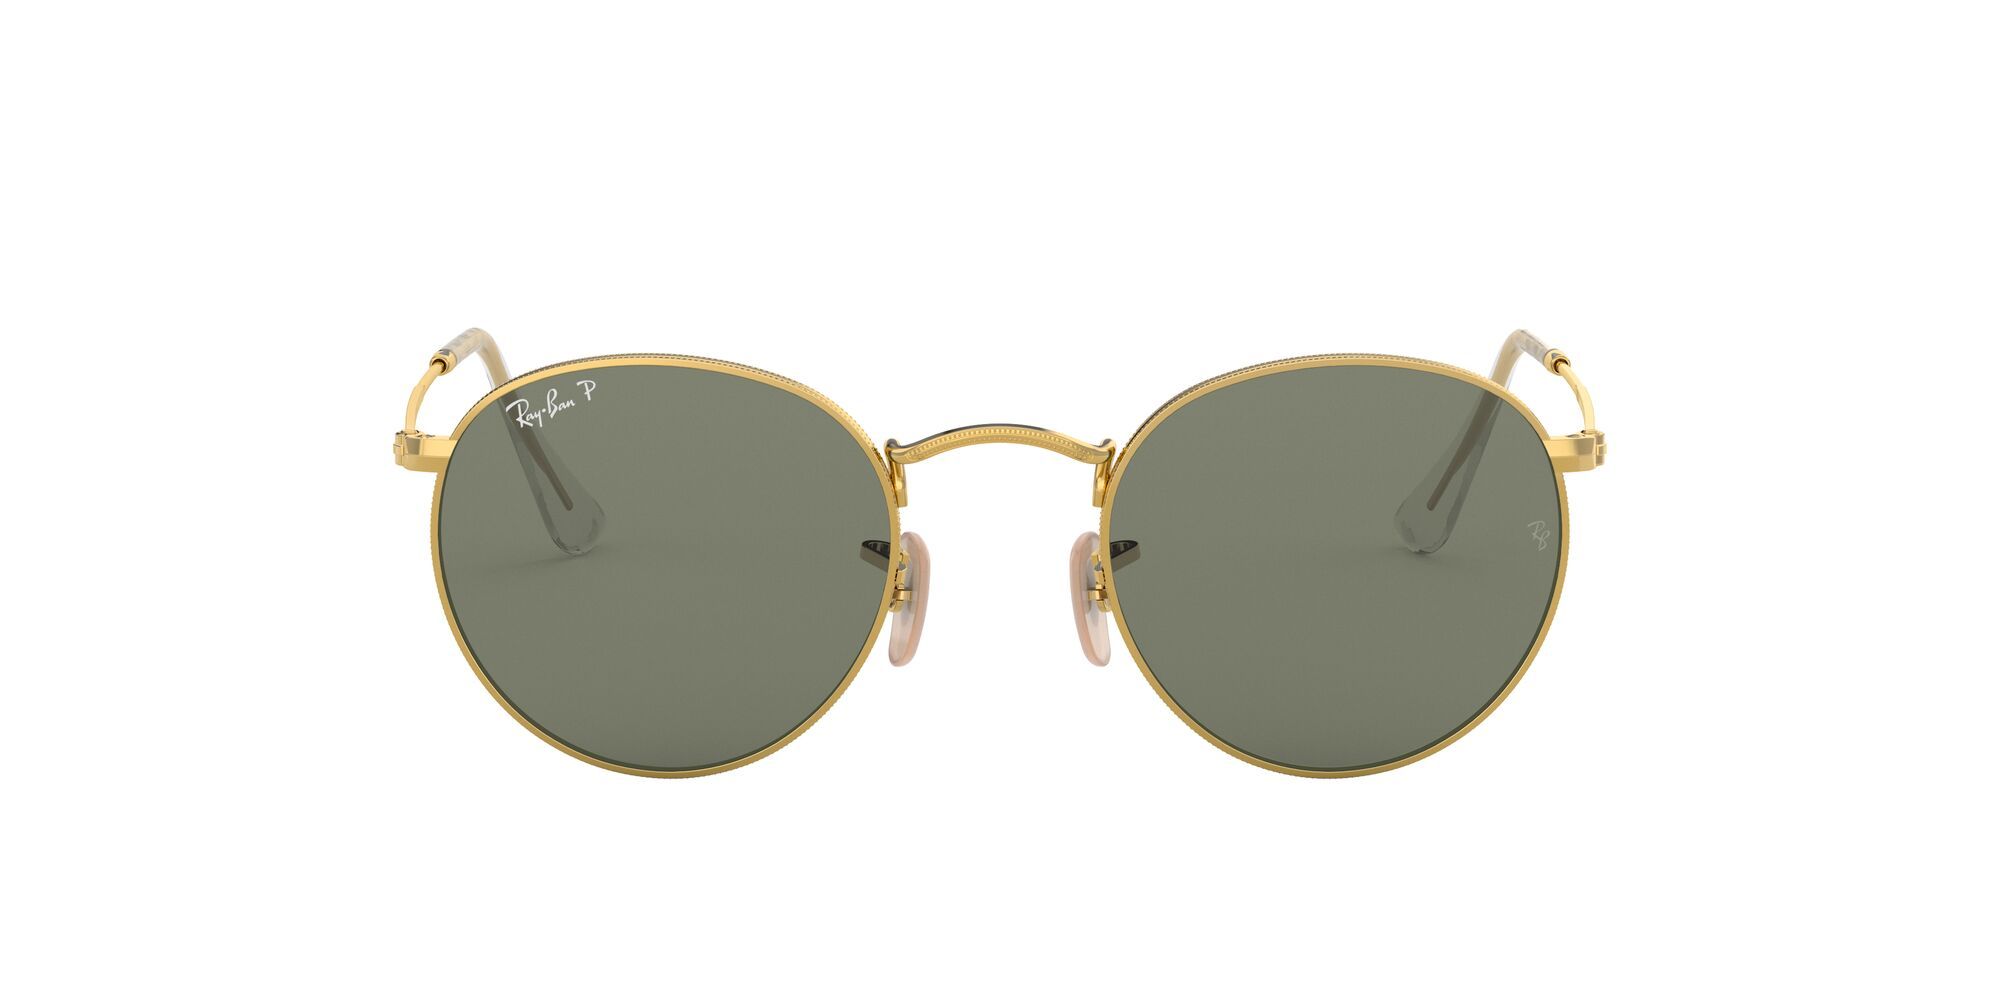 Ray-Ban 0RB3447 Green Polarized Icons Round Sunglasses (50 mm)